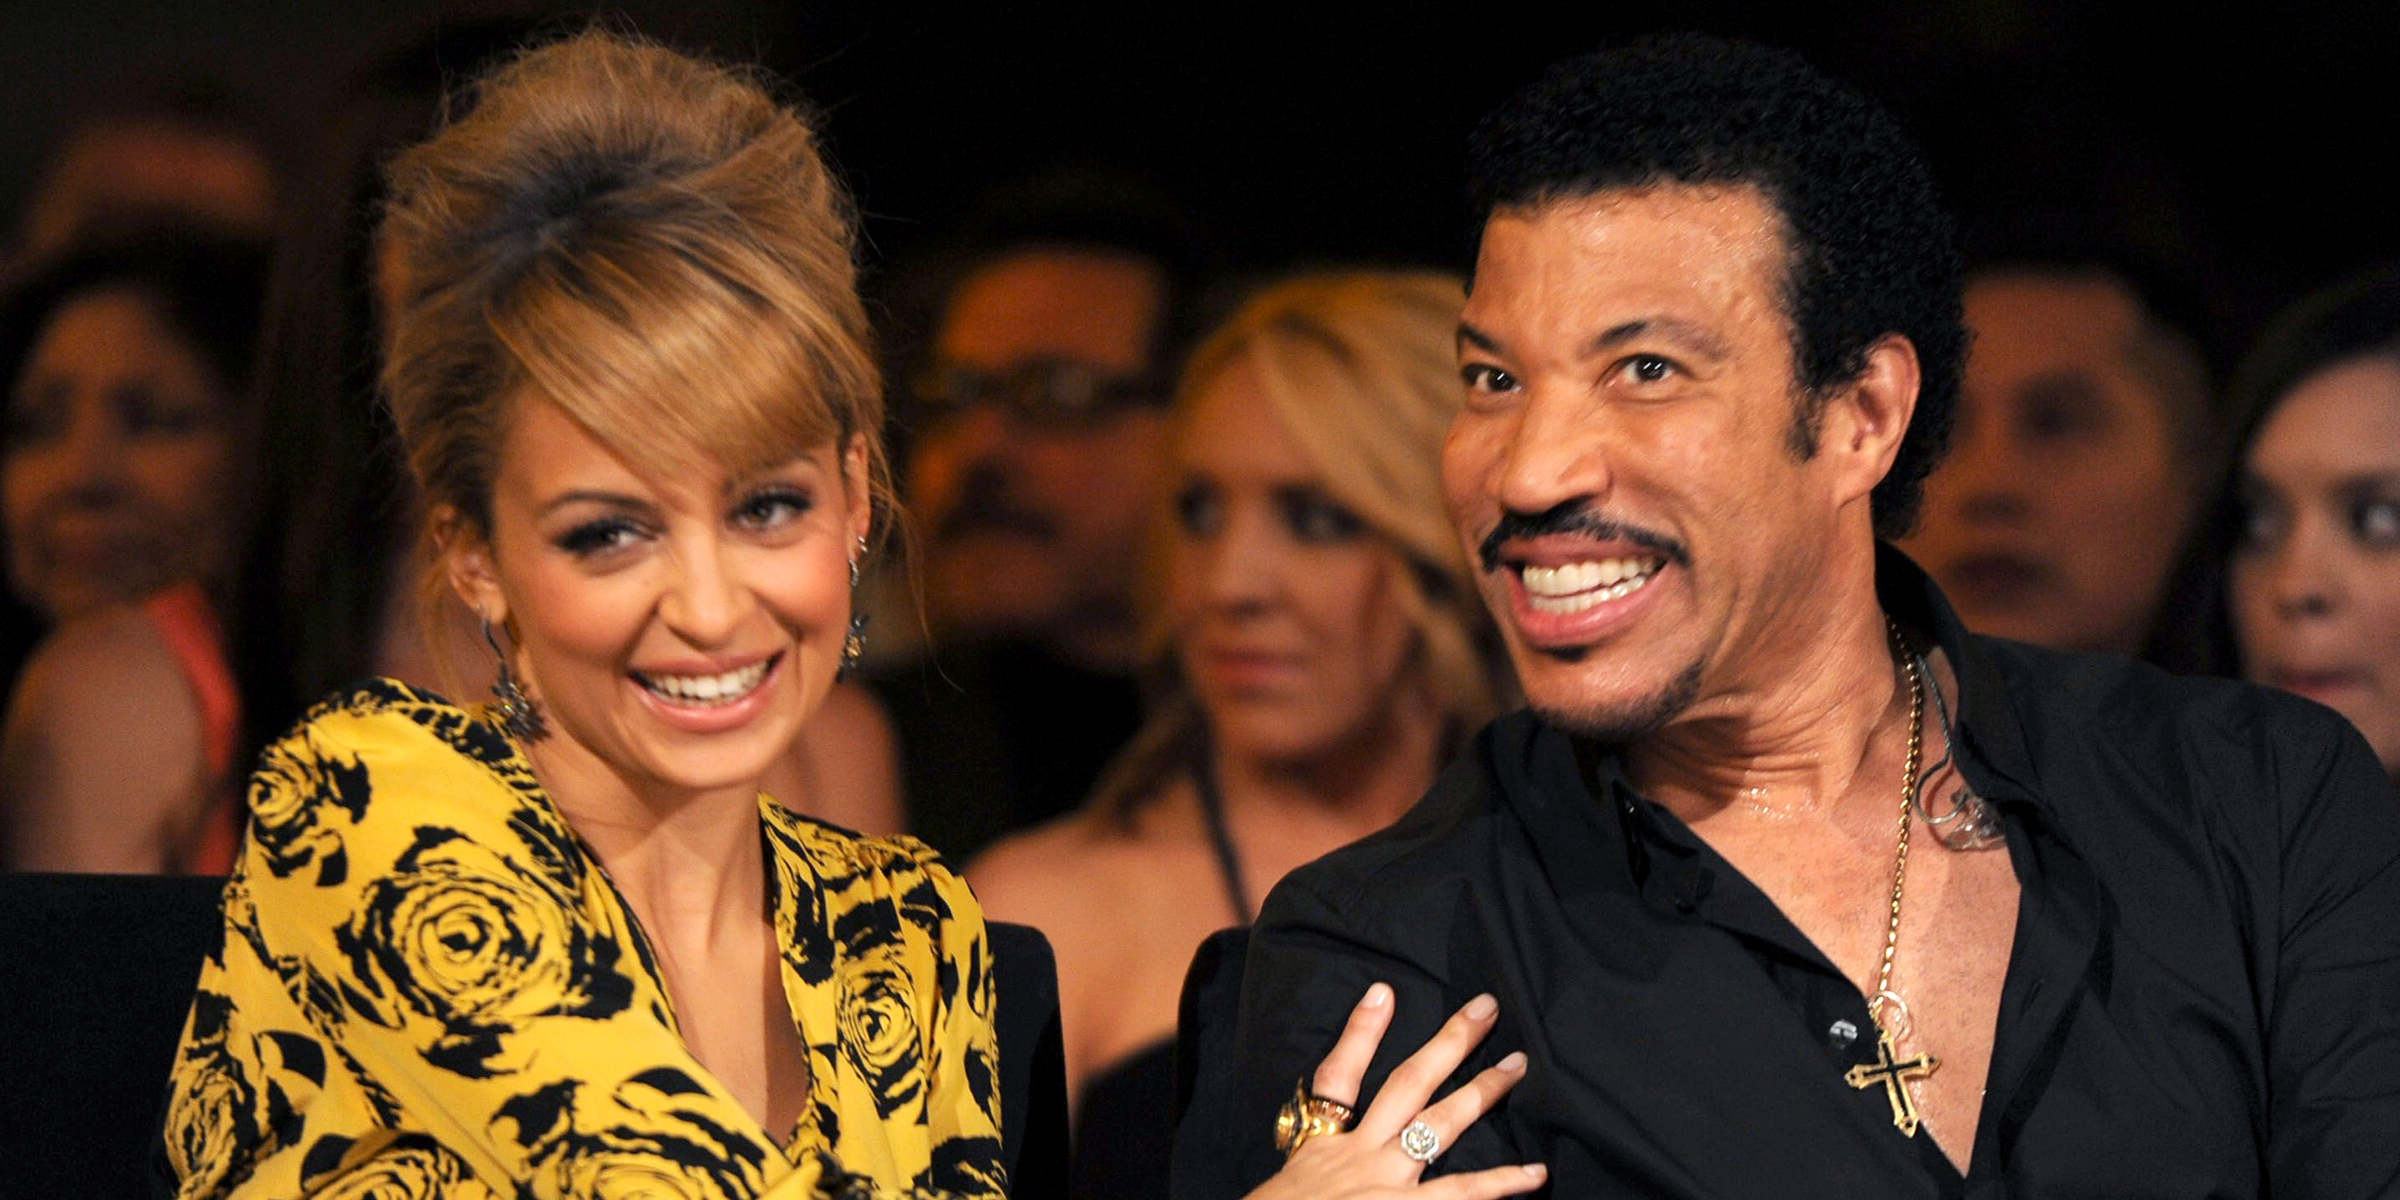 Nicole and Lionel Richie | Source: Getty Images